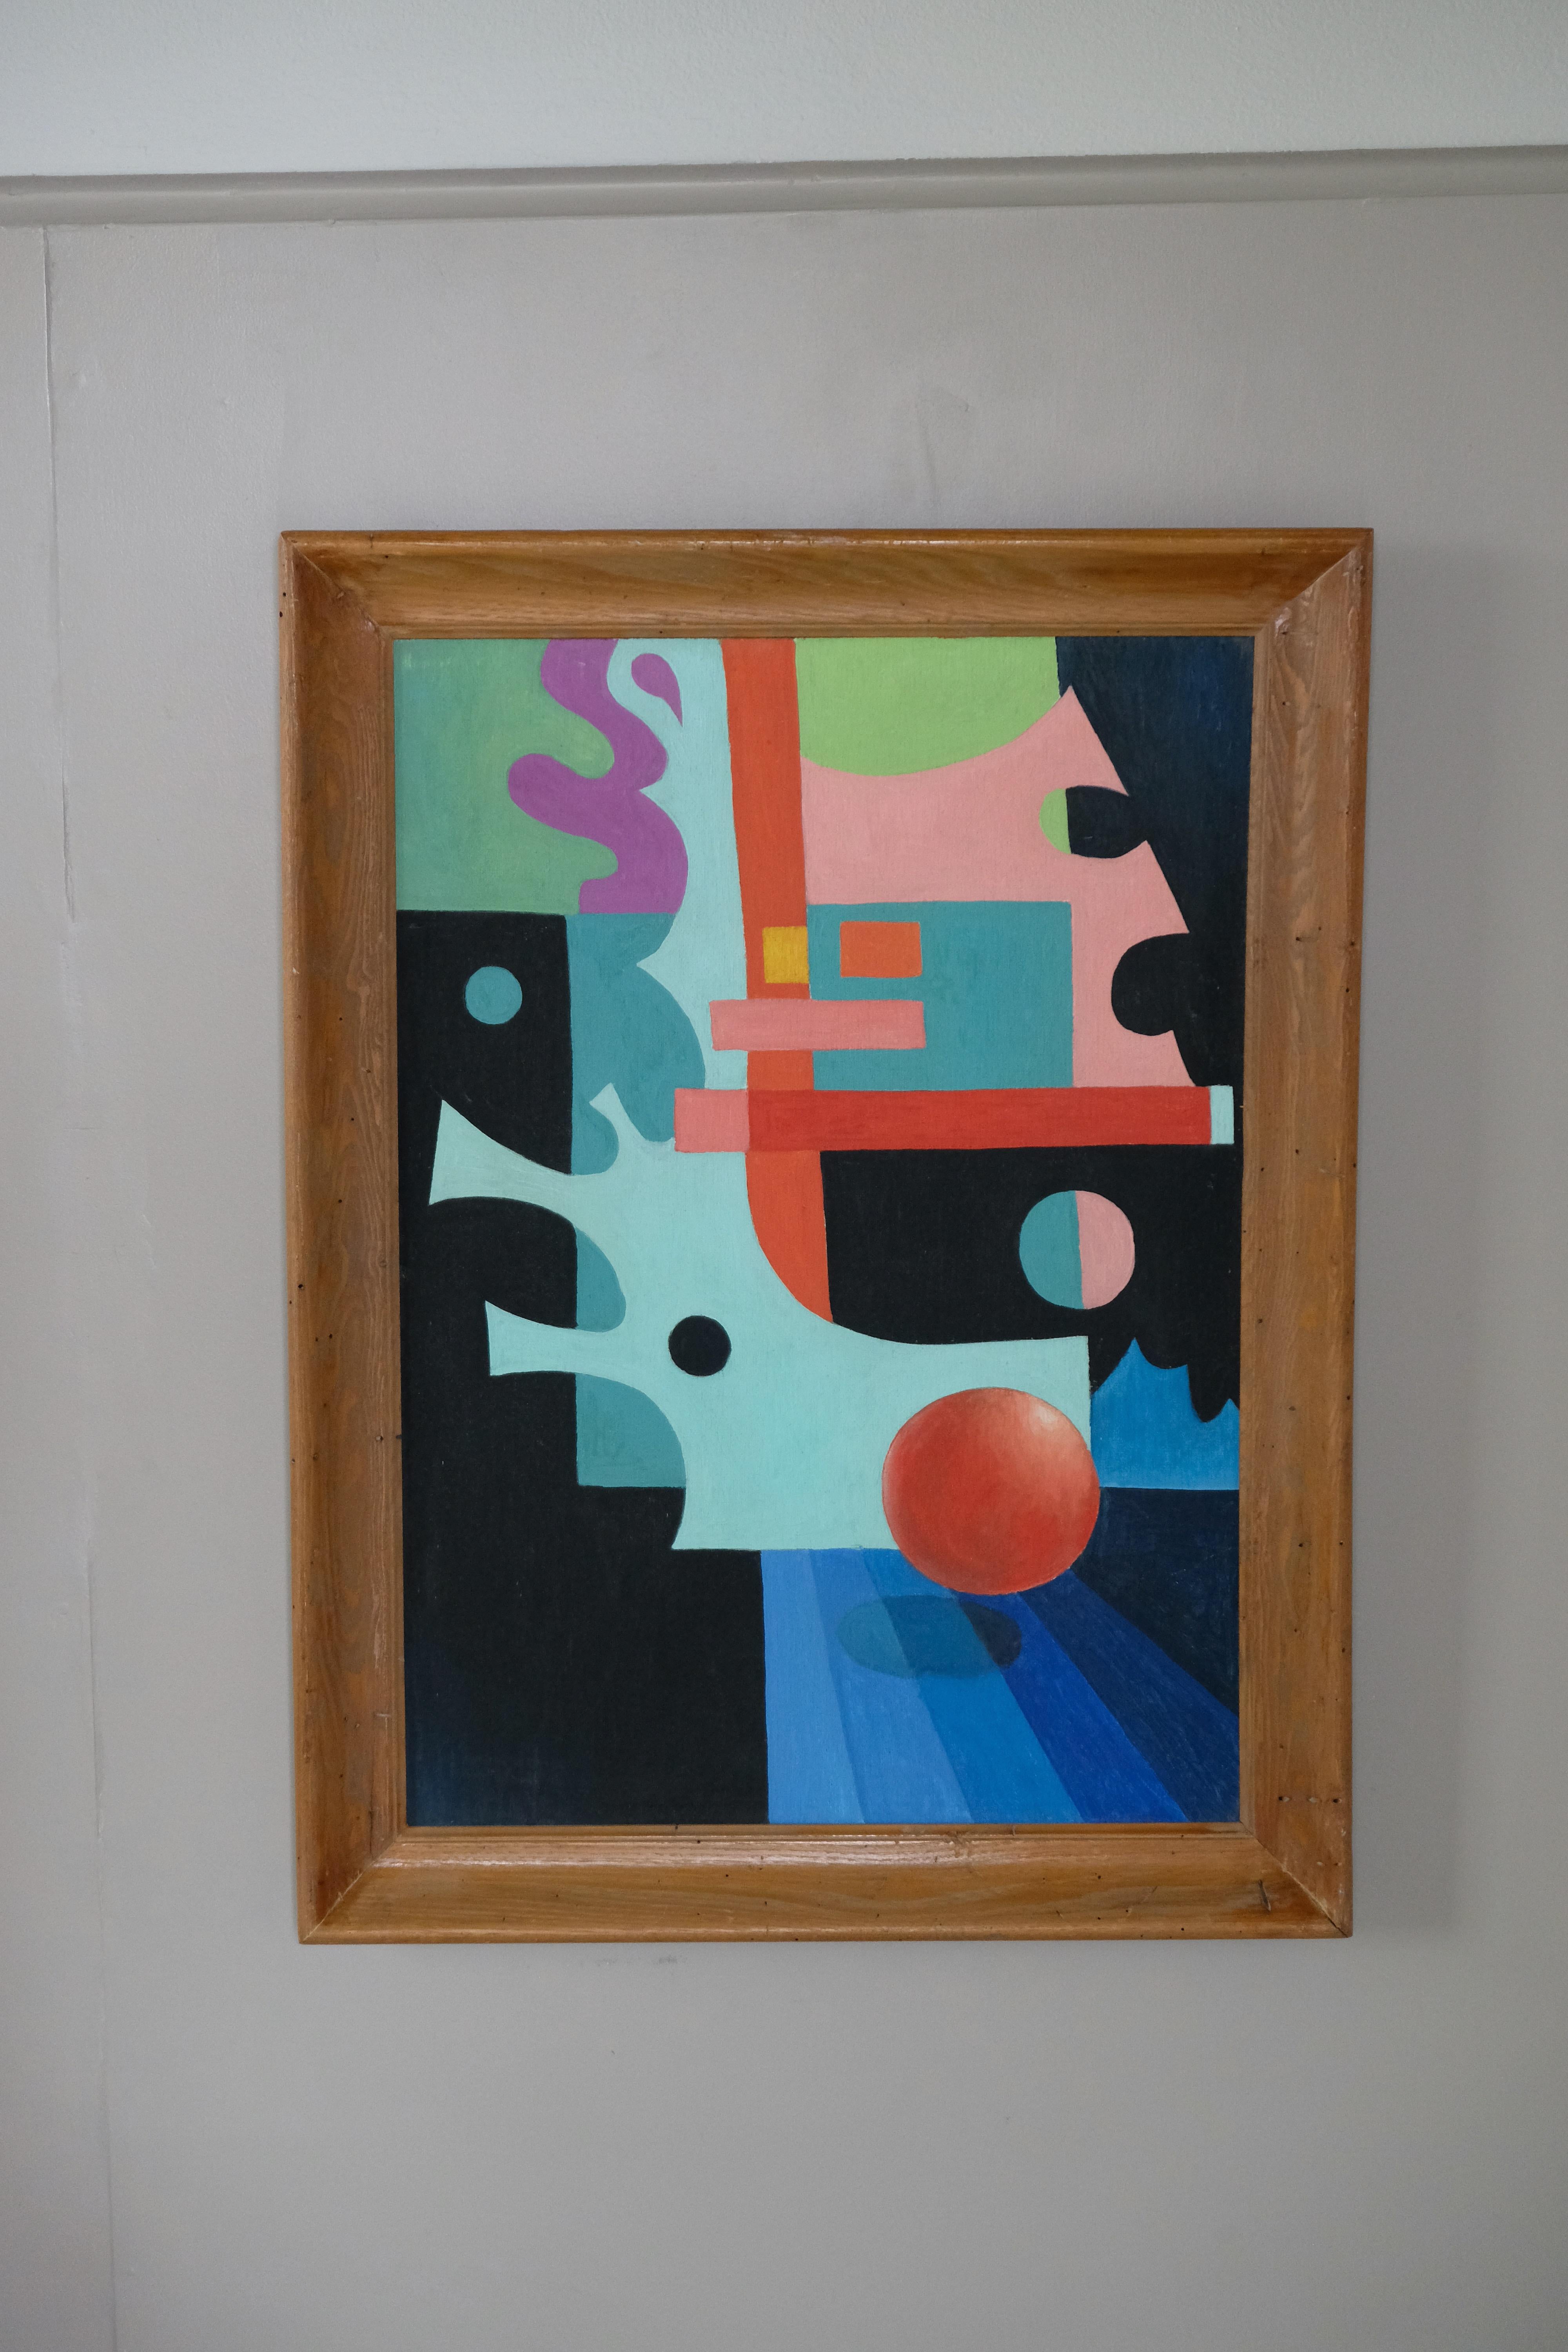 Geometric abstract by California artist Gerald Rowles (1929 - 2019), titled 